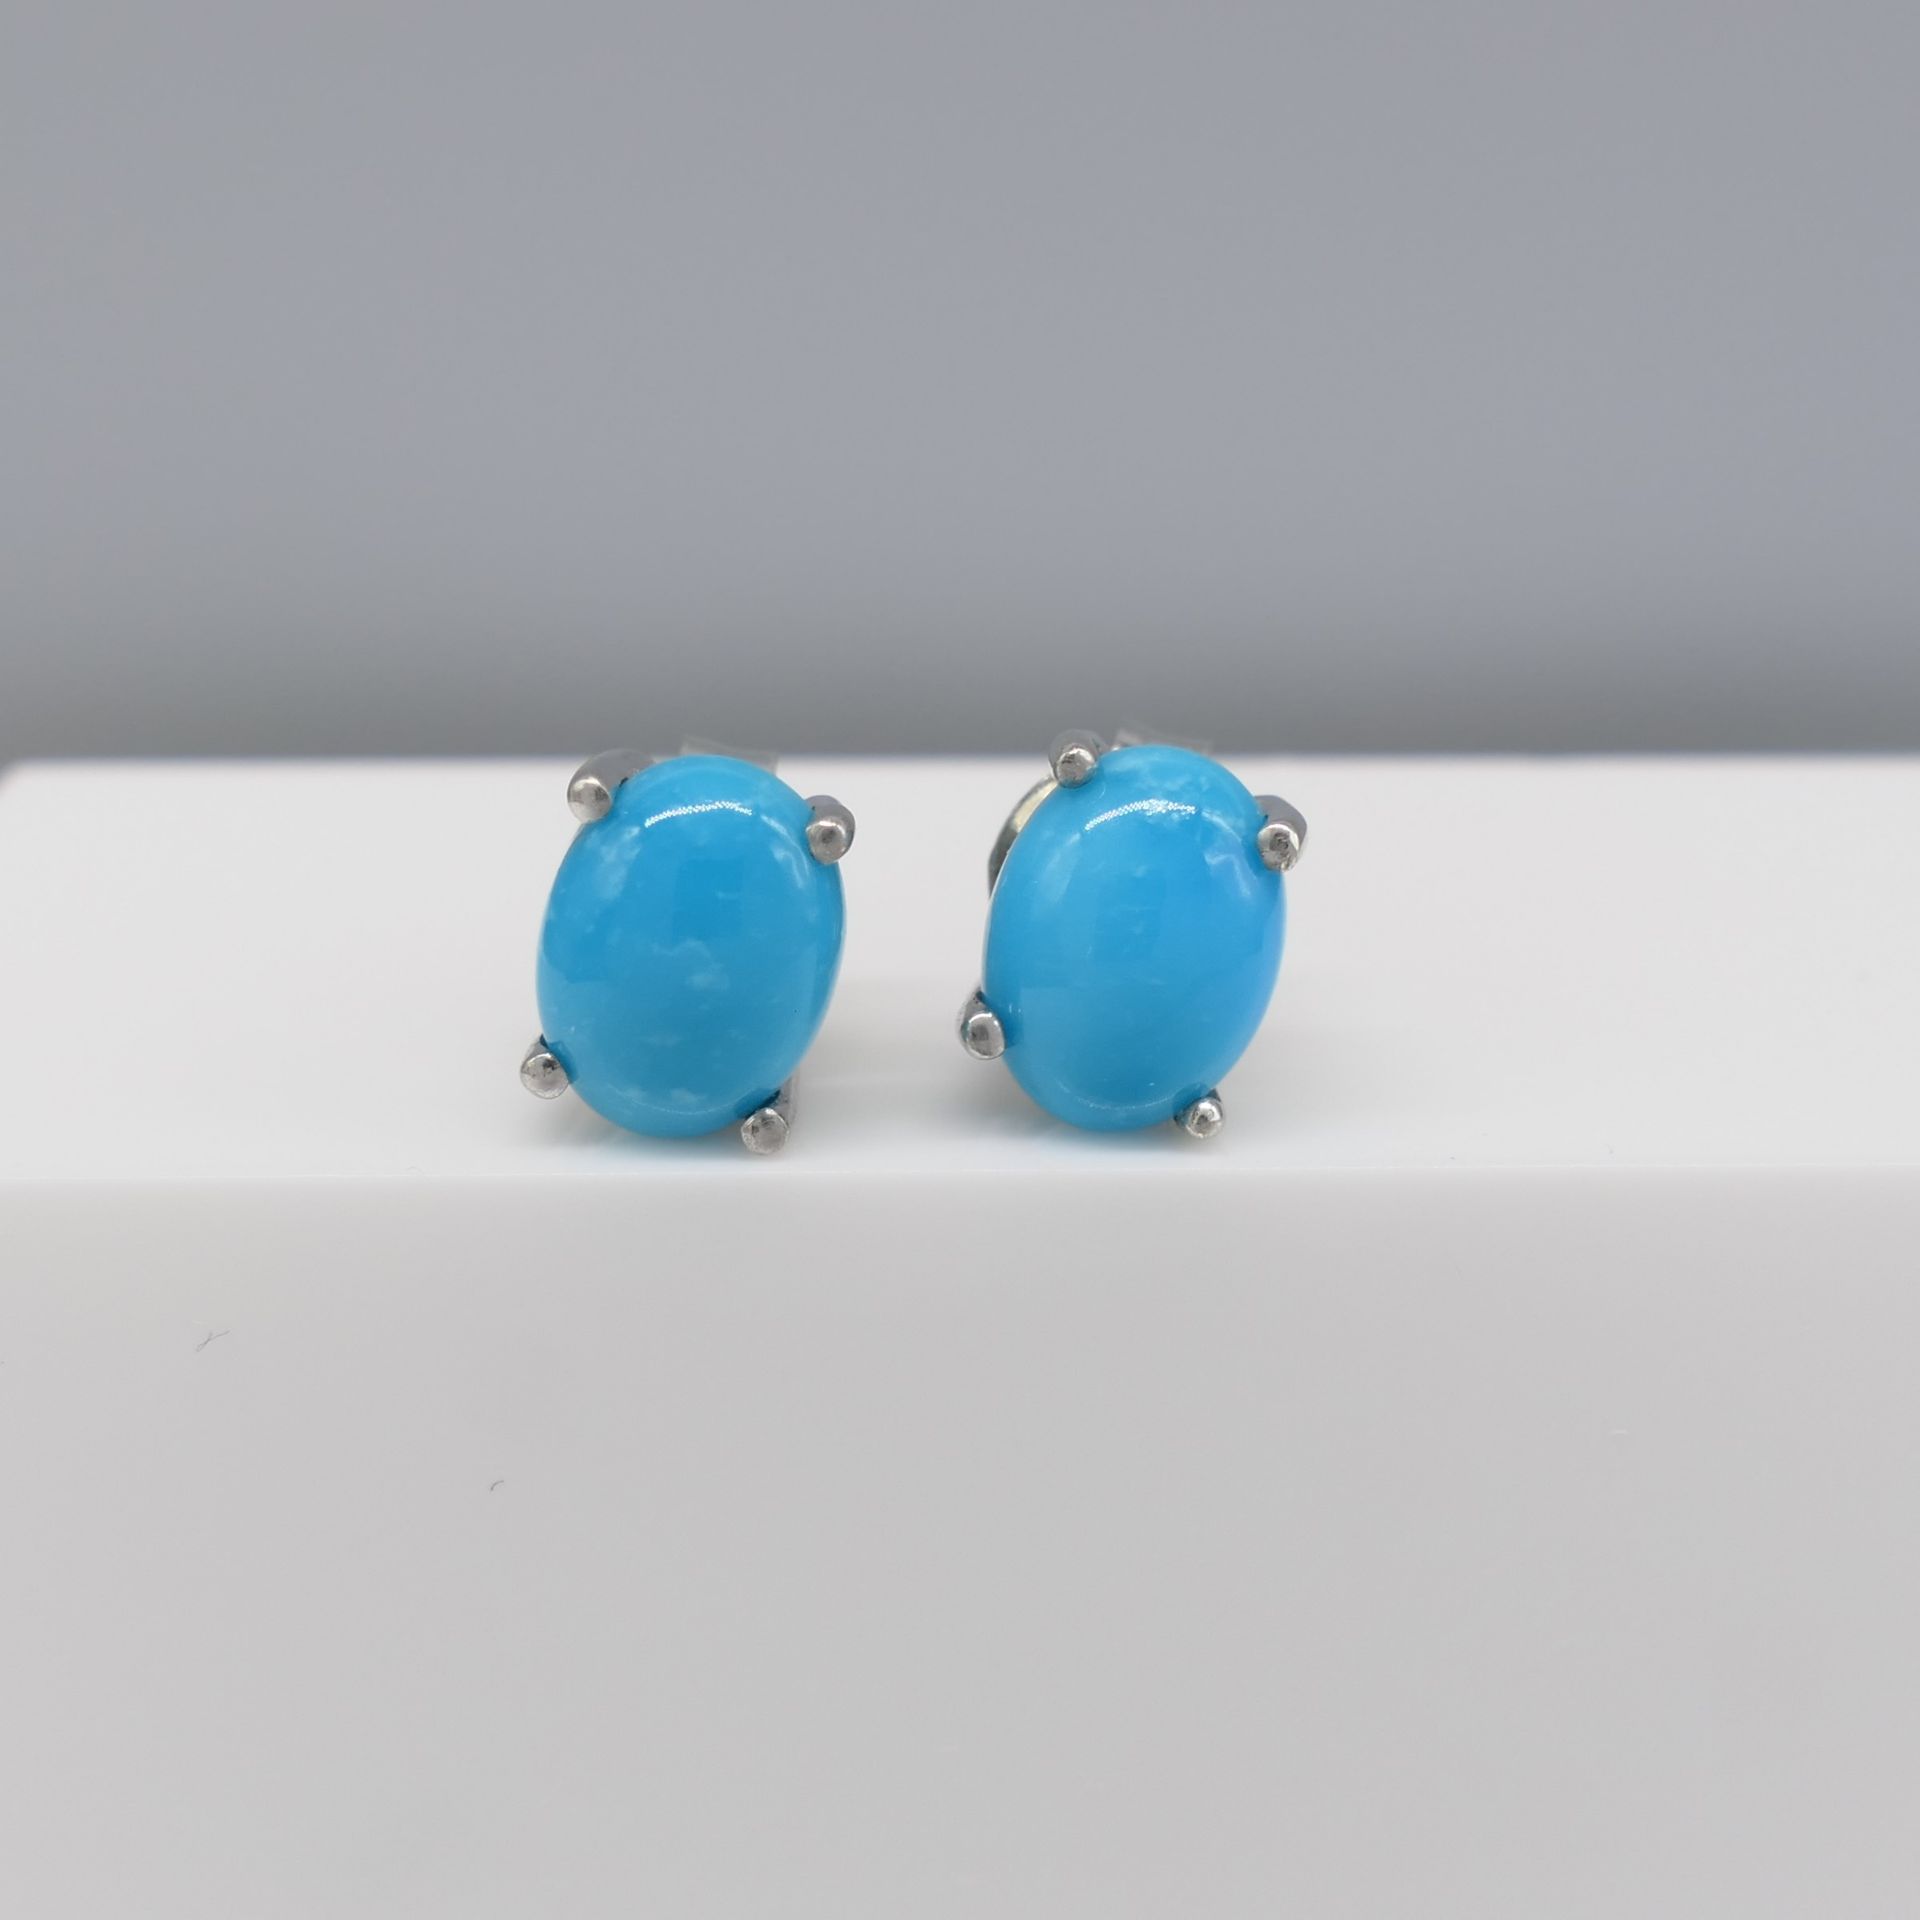 A Pair of Natural Cabochon Turquoise Ear Studs In Silver, With Butterfly Backs - Image 2 of 5